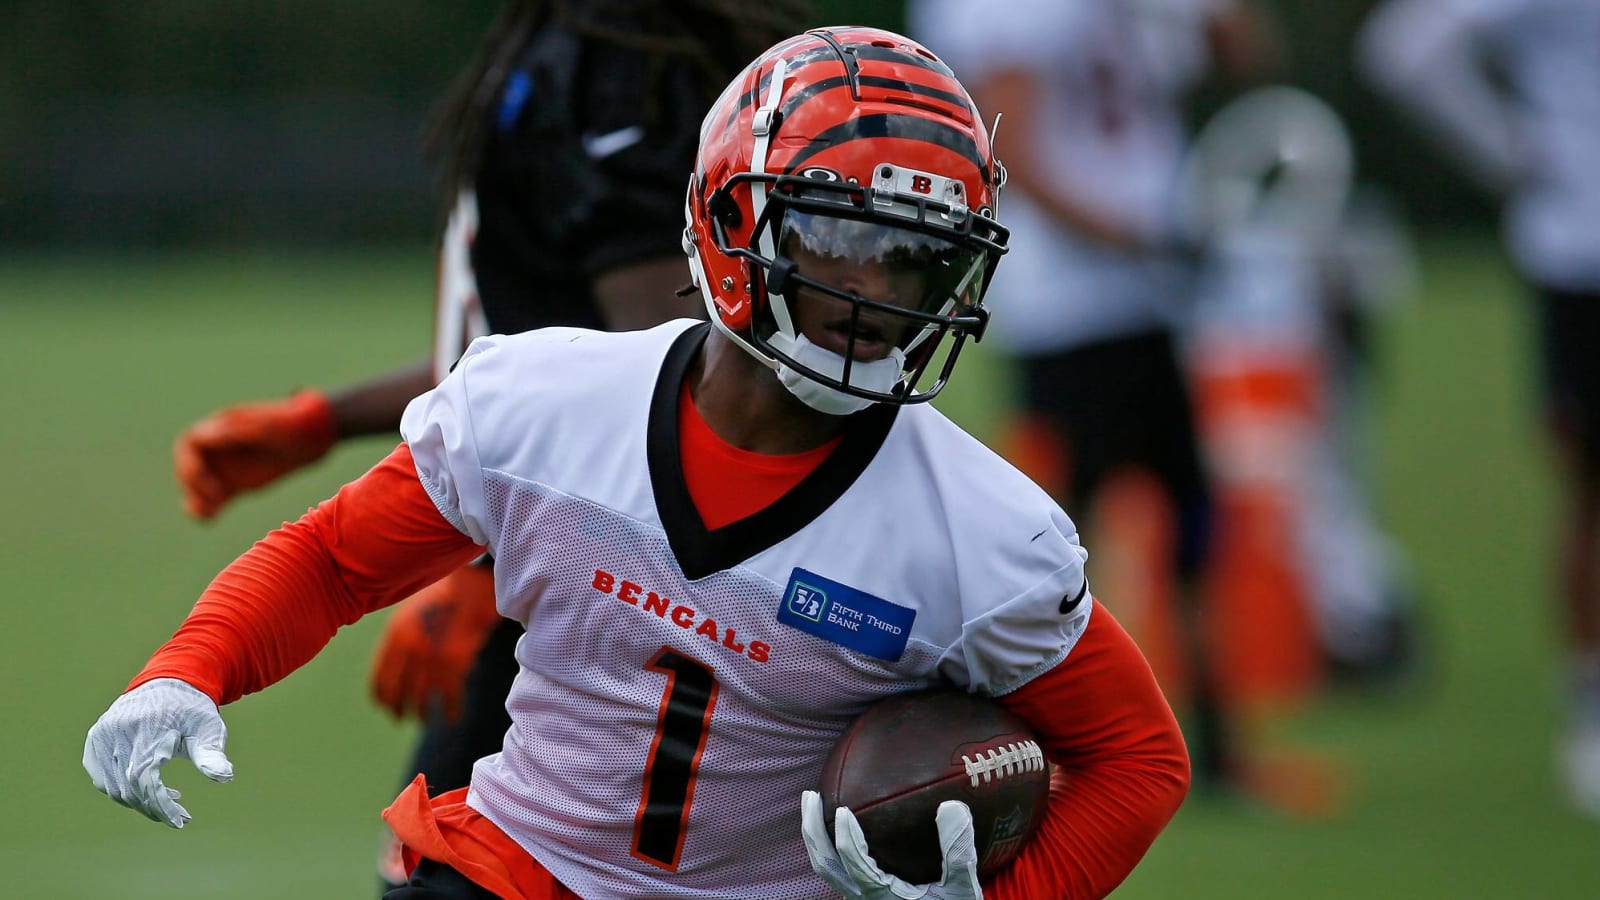 Bengals WR Ja’Marr Chase attempts to explain drop issues